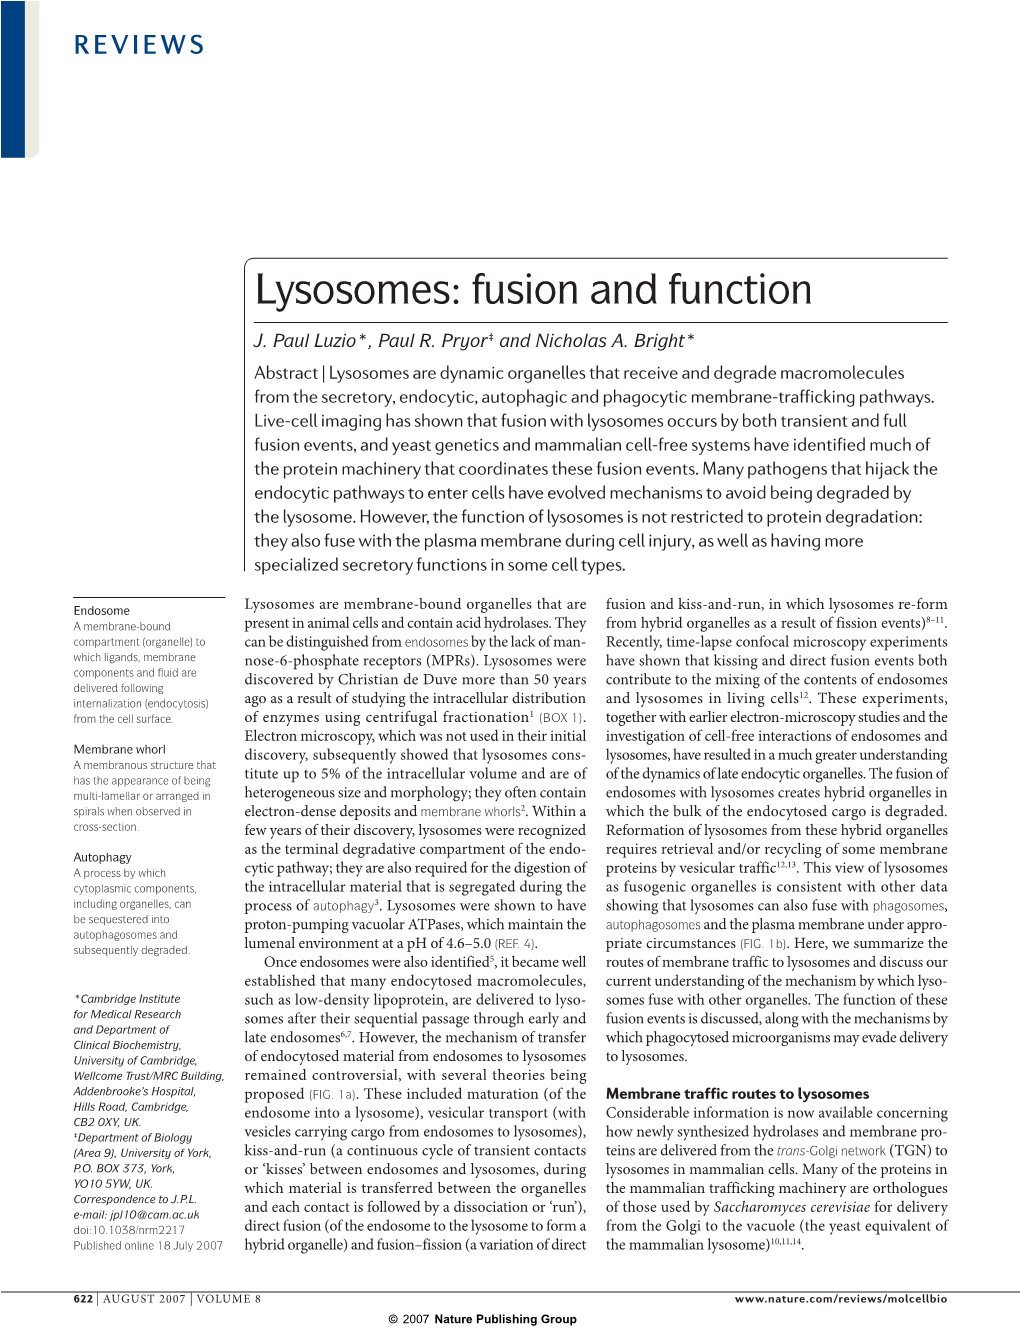 Lysosomes: Fusion and Function